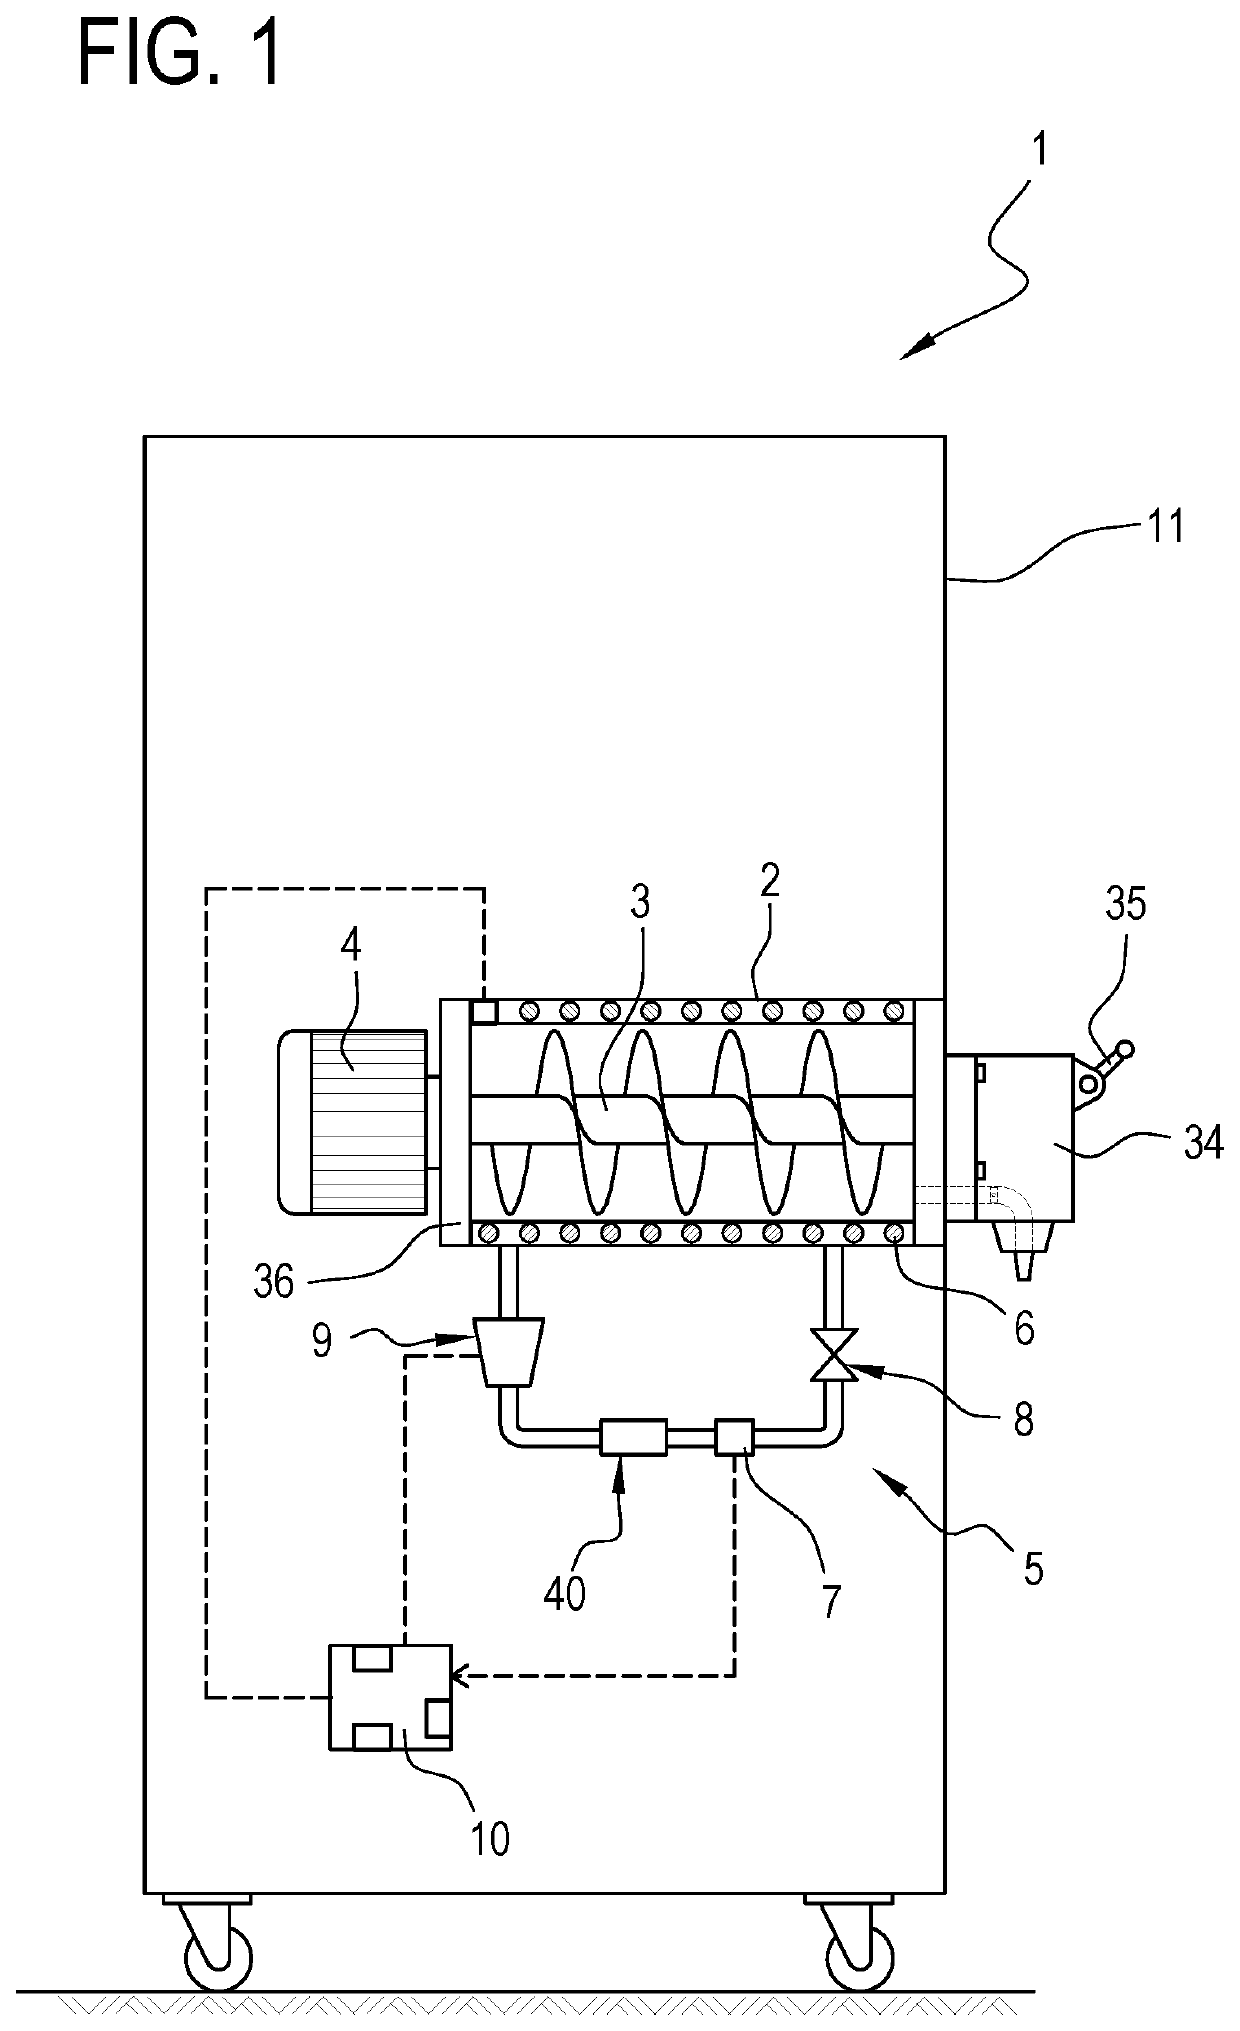 Stirring device of a machine for making liquid or semi-liquid food products